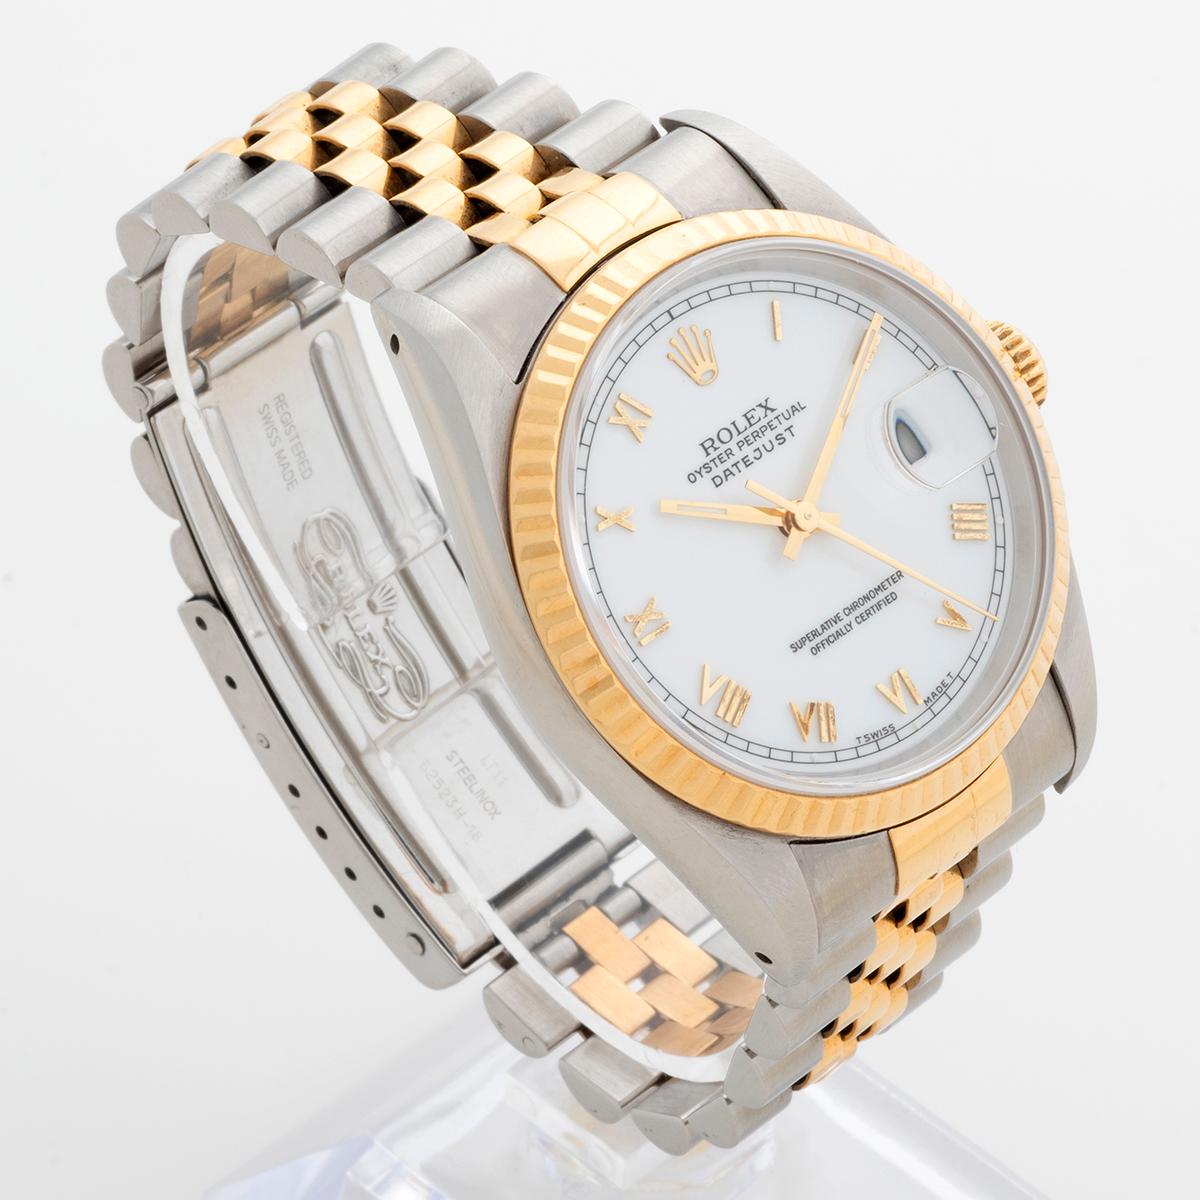 Our iconic neo vintage Rolex Datejust reference 16233 features a steel and 18k yellow gold 36mm case with steel and 18 k yellow gold jubilee bracelet. This Datejust notably features an attractive and rare white dial with 'thin' Roman Numerals,